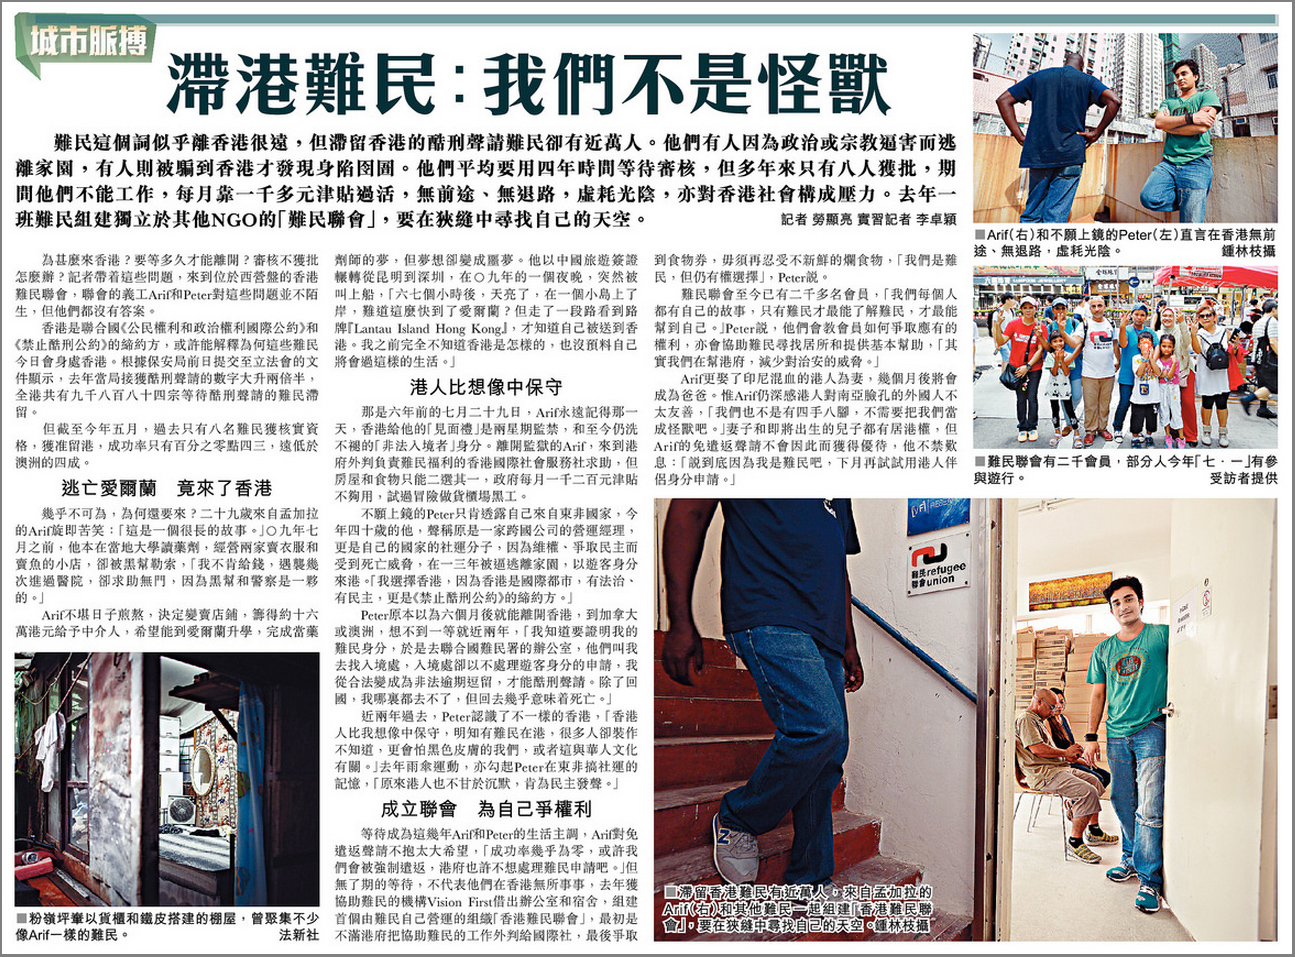 Sing Tao Daily - article on Refugee Union (5Jul2015)